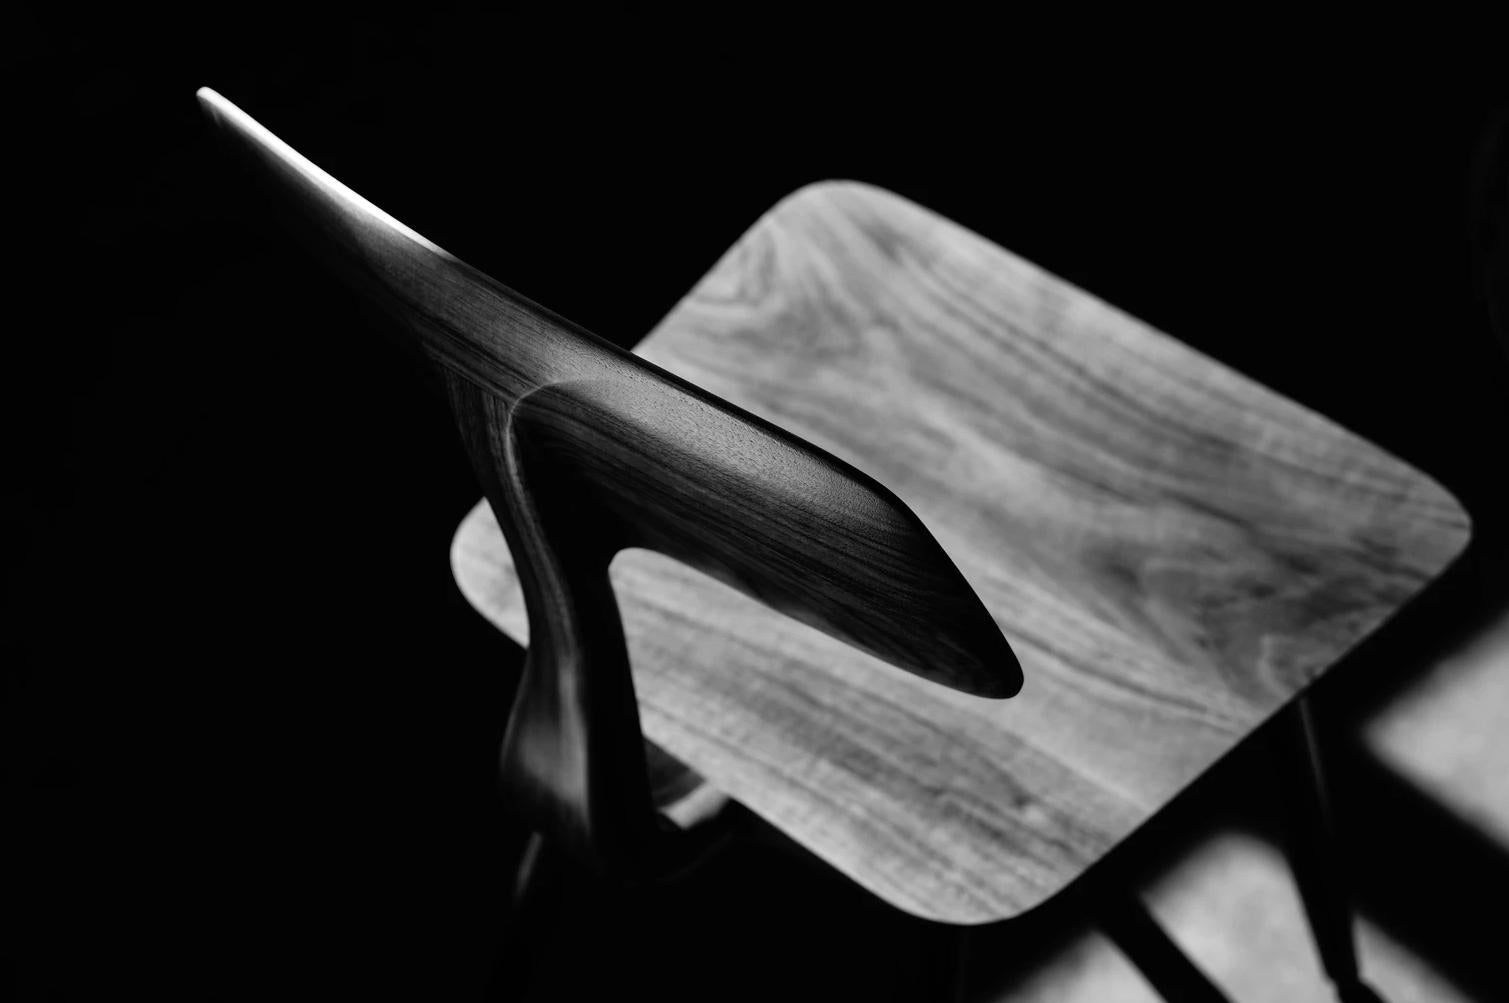 American Mantaray Chair in Walnut Wood, Hand-Sculpted Dining Chair by Kokora For Sale